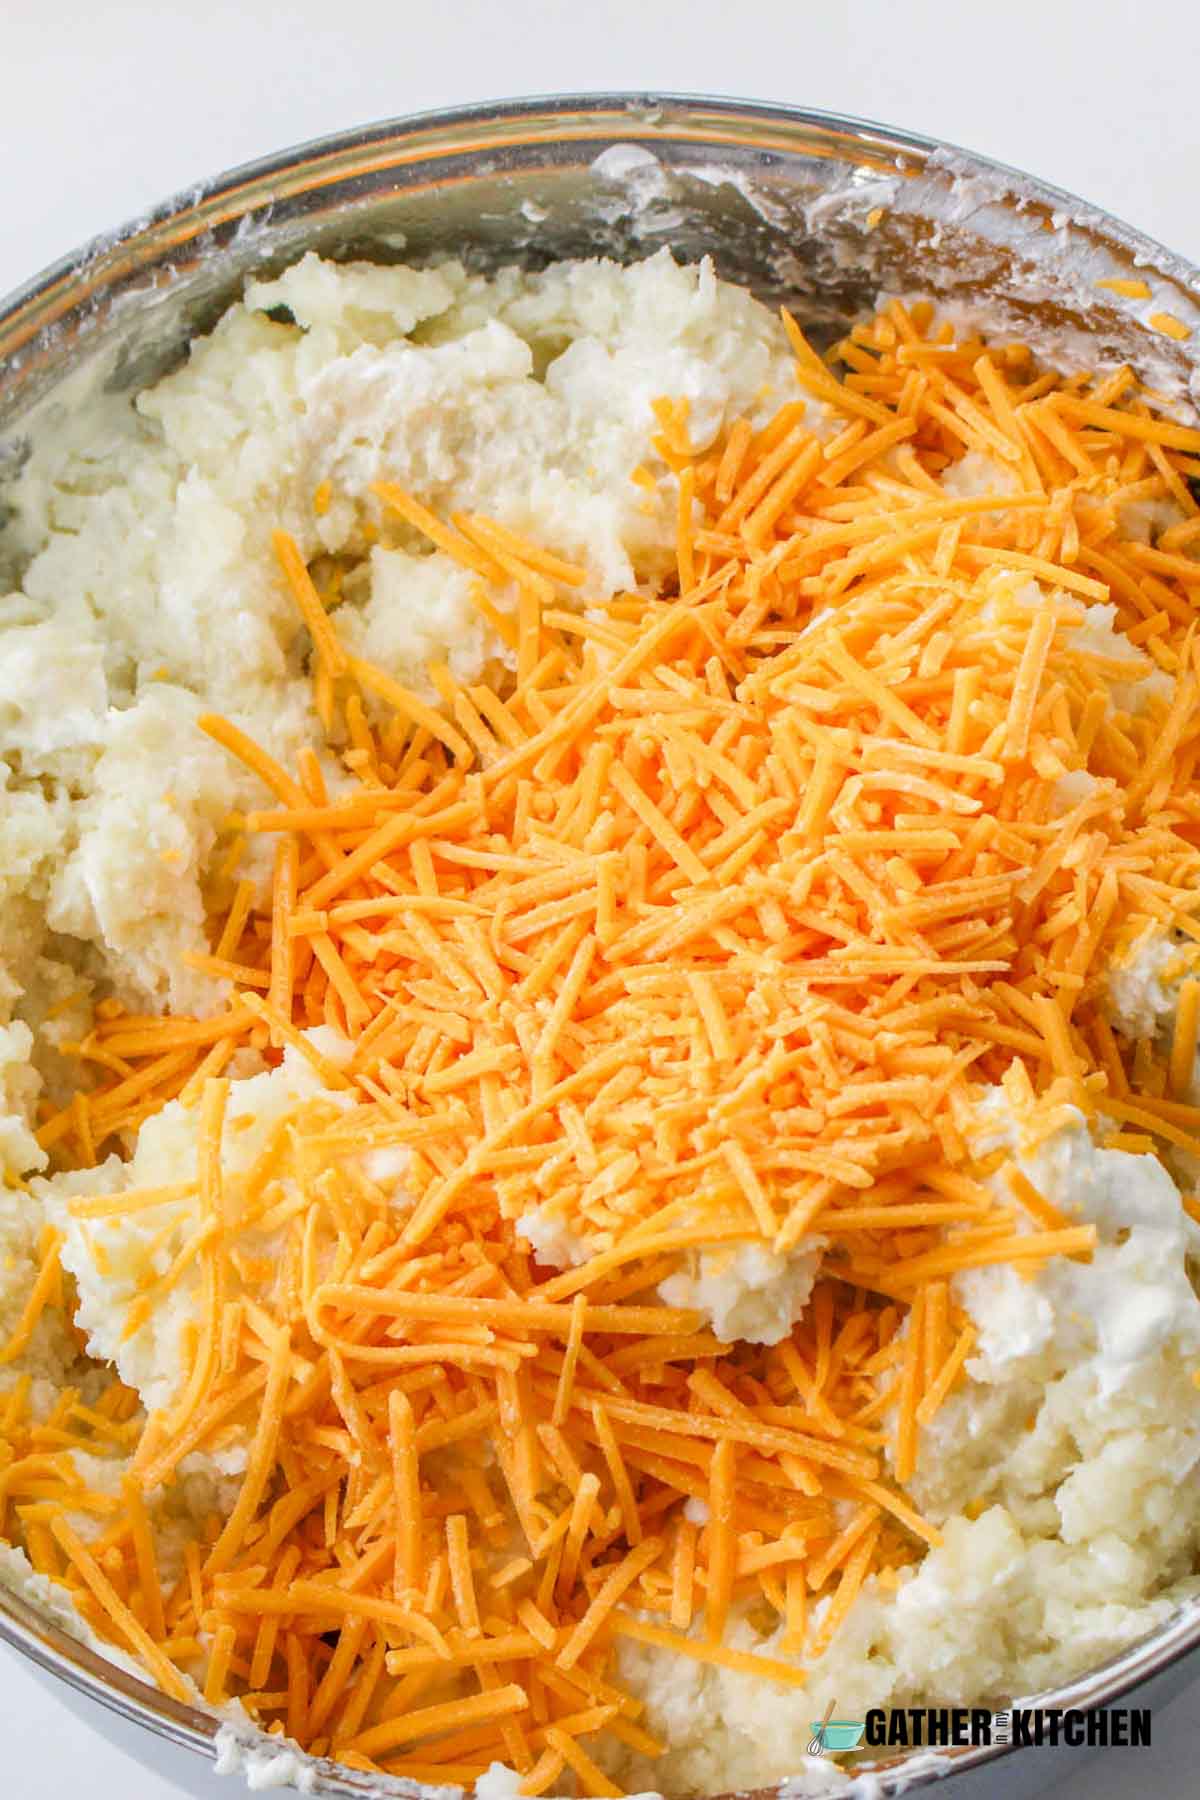 Cheddar cheese added to mashed potatoes.